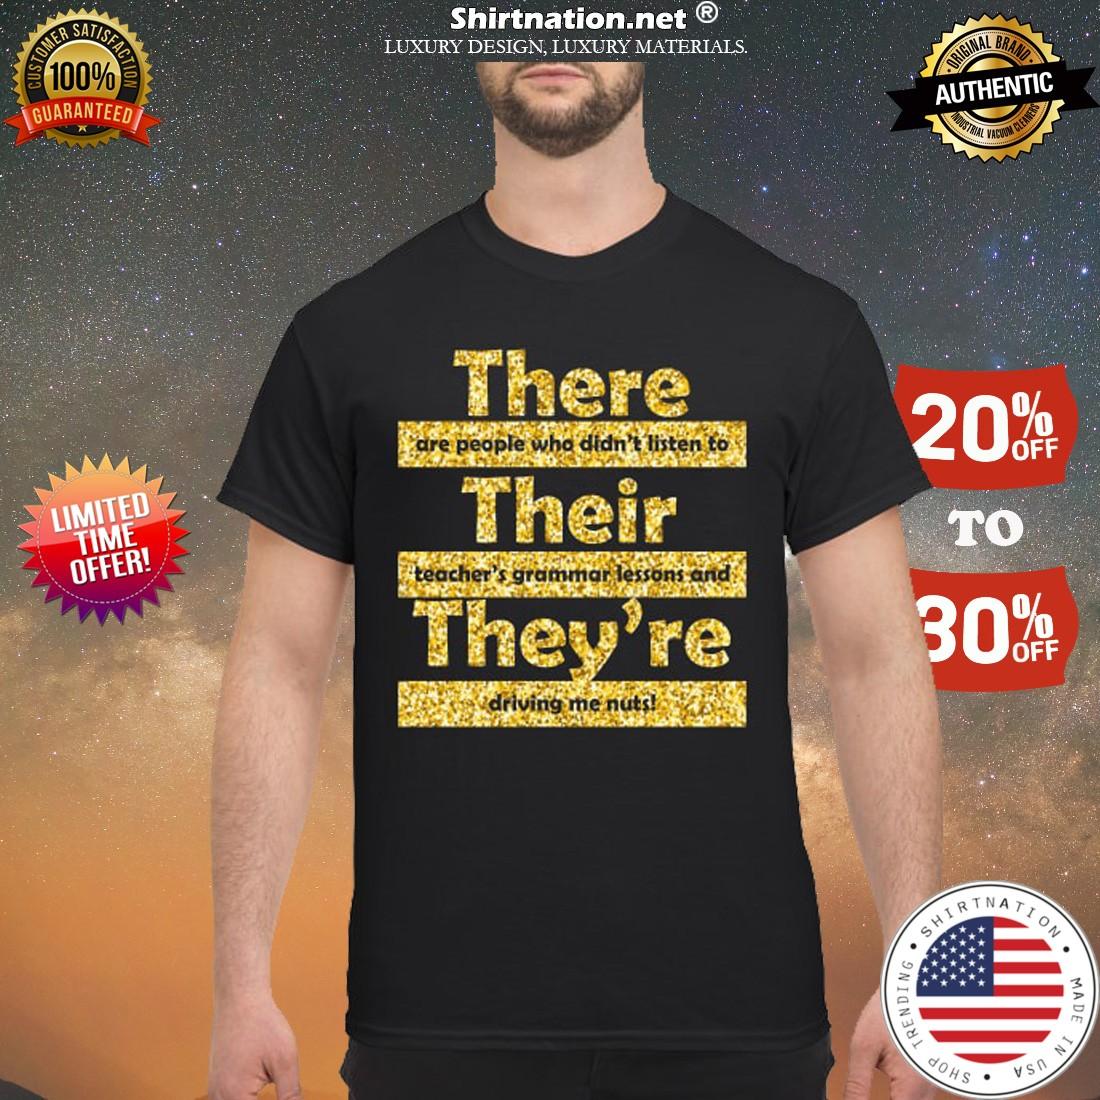 They are people who didn't listen to their teacher's grammar lessons and they're driving me nuts shirt